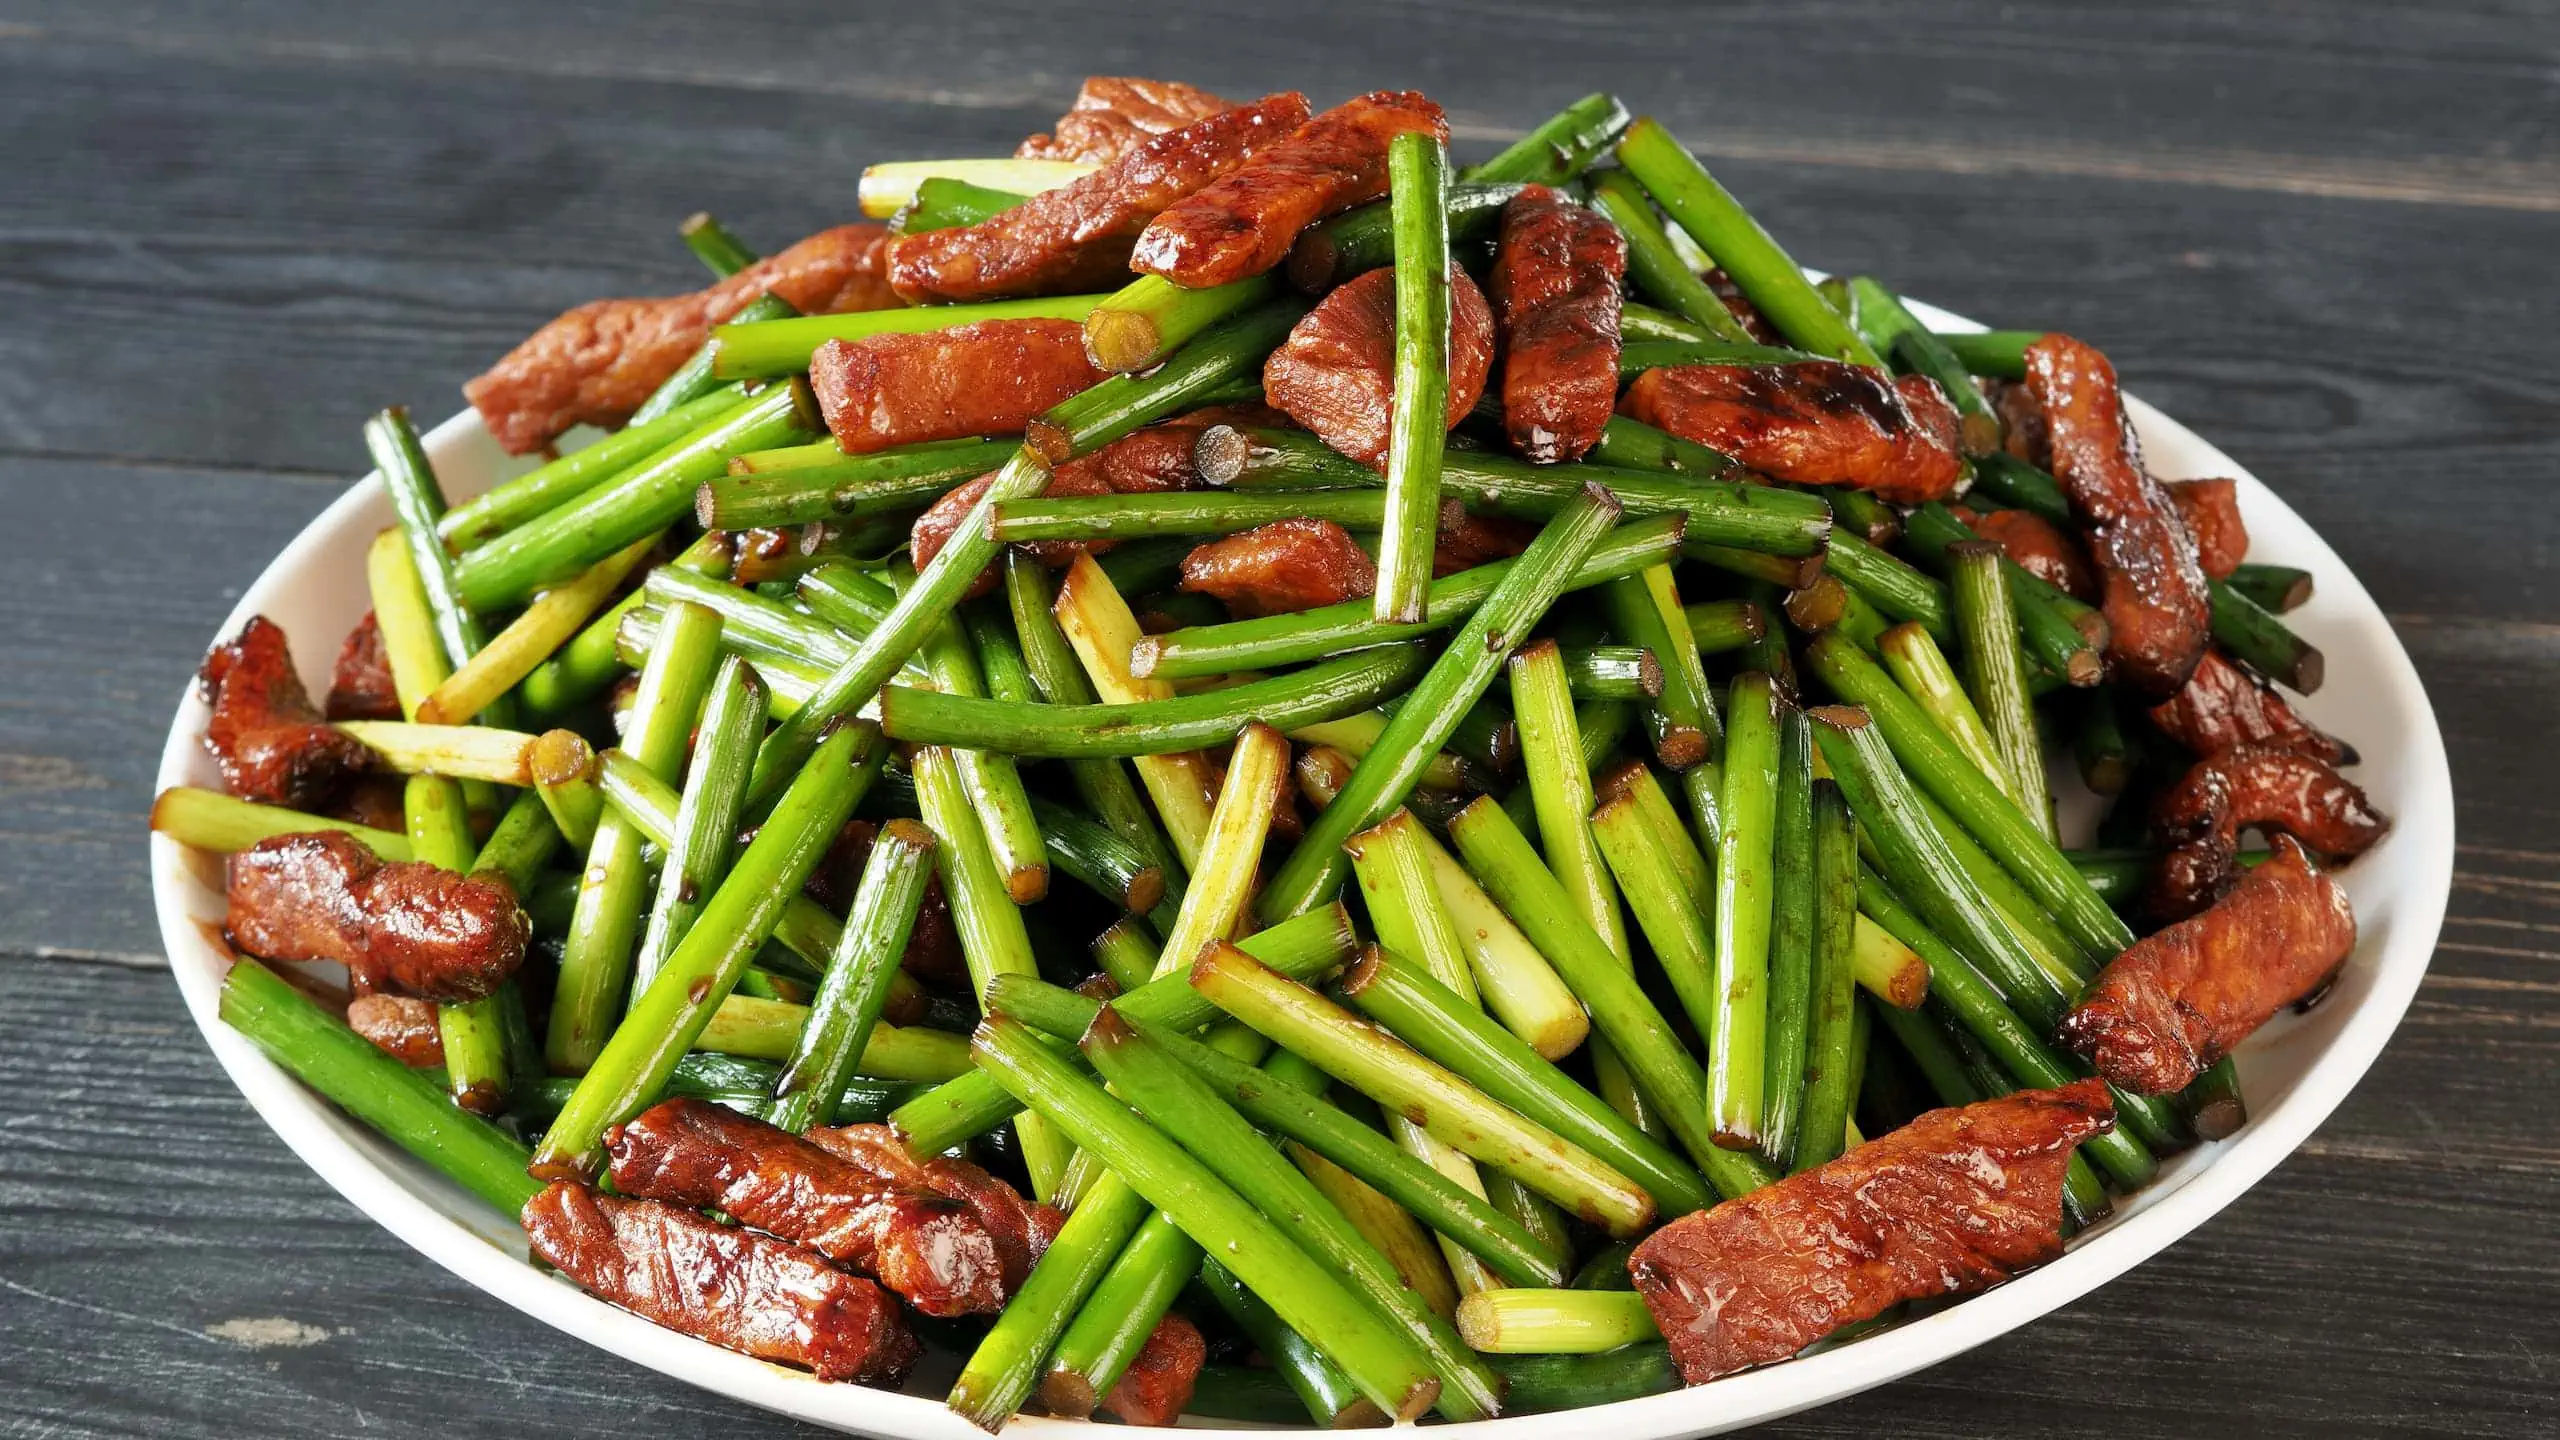 Our version of crack green beans